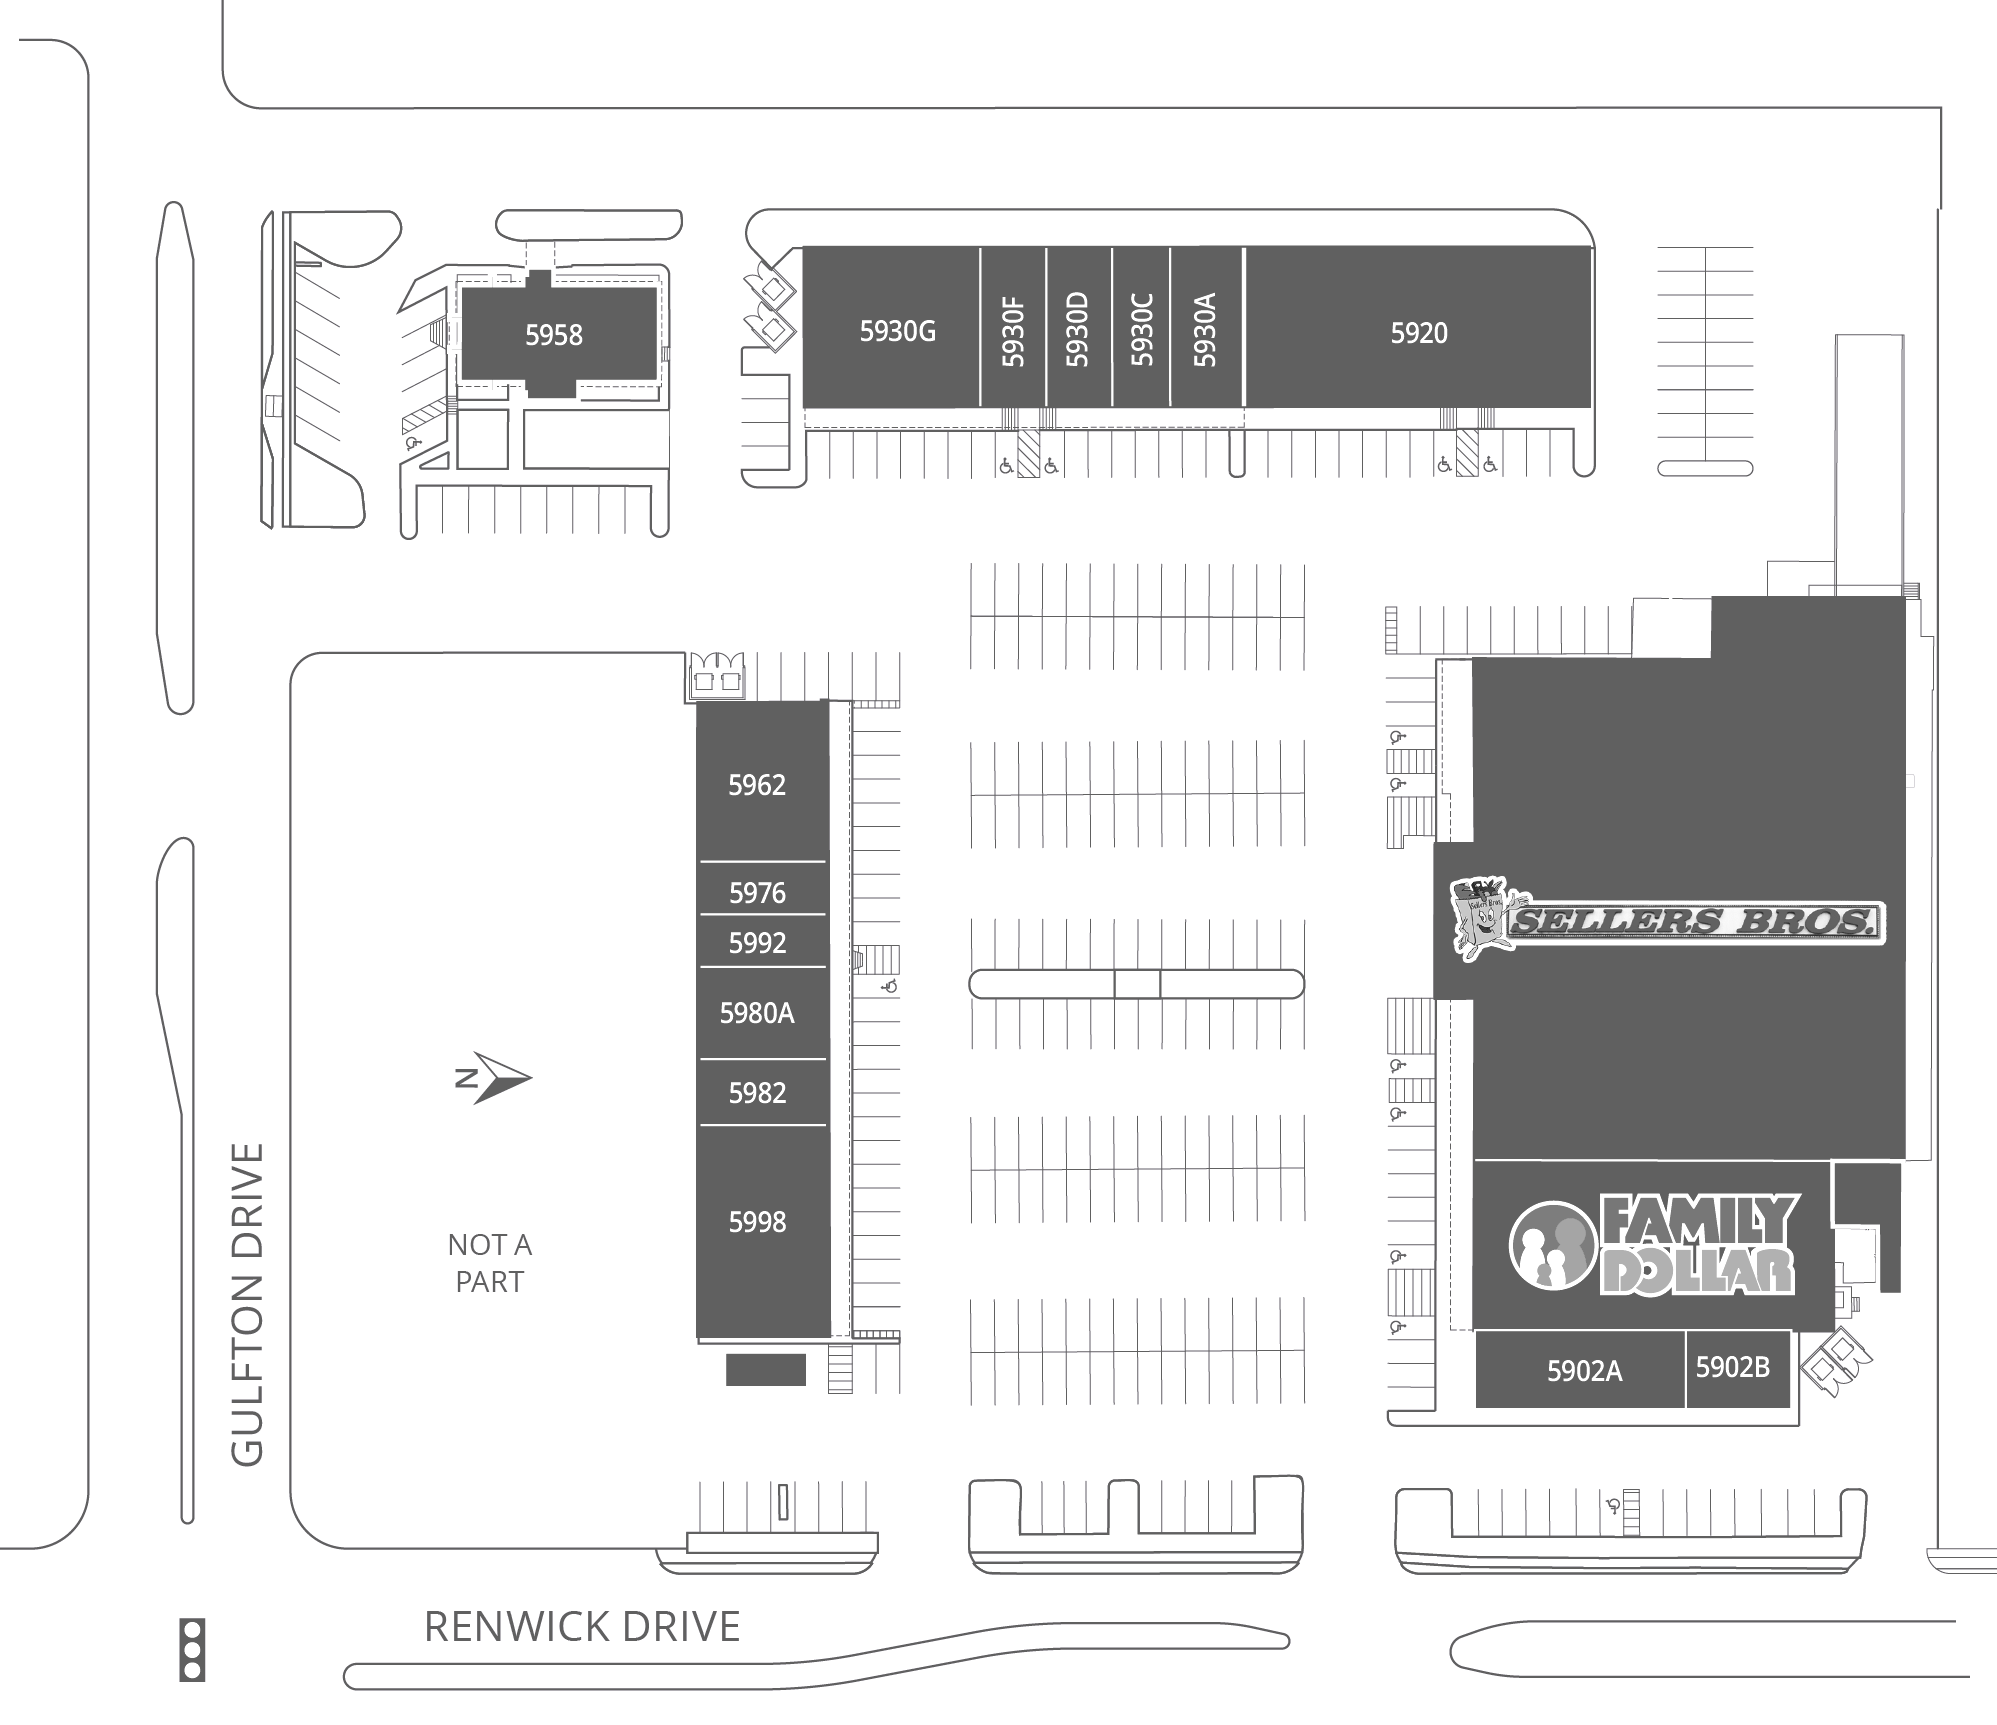 Orchard Green Shopping Center Site Plan